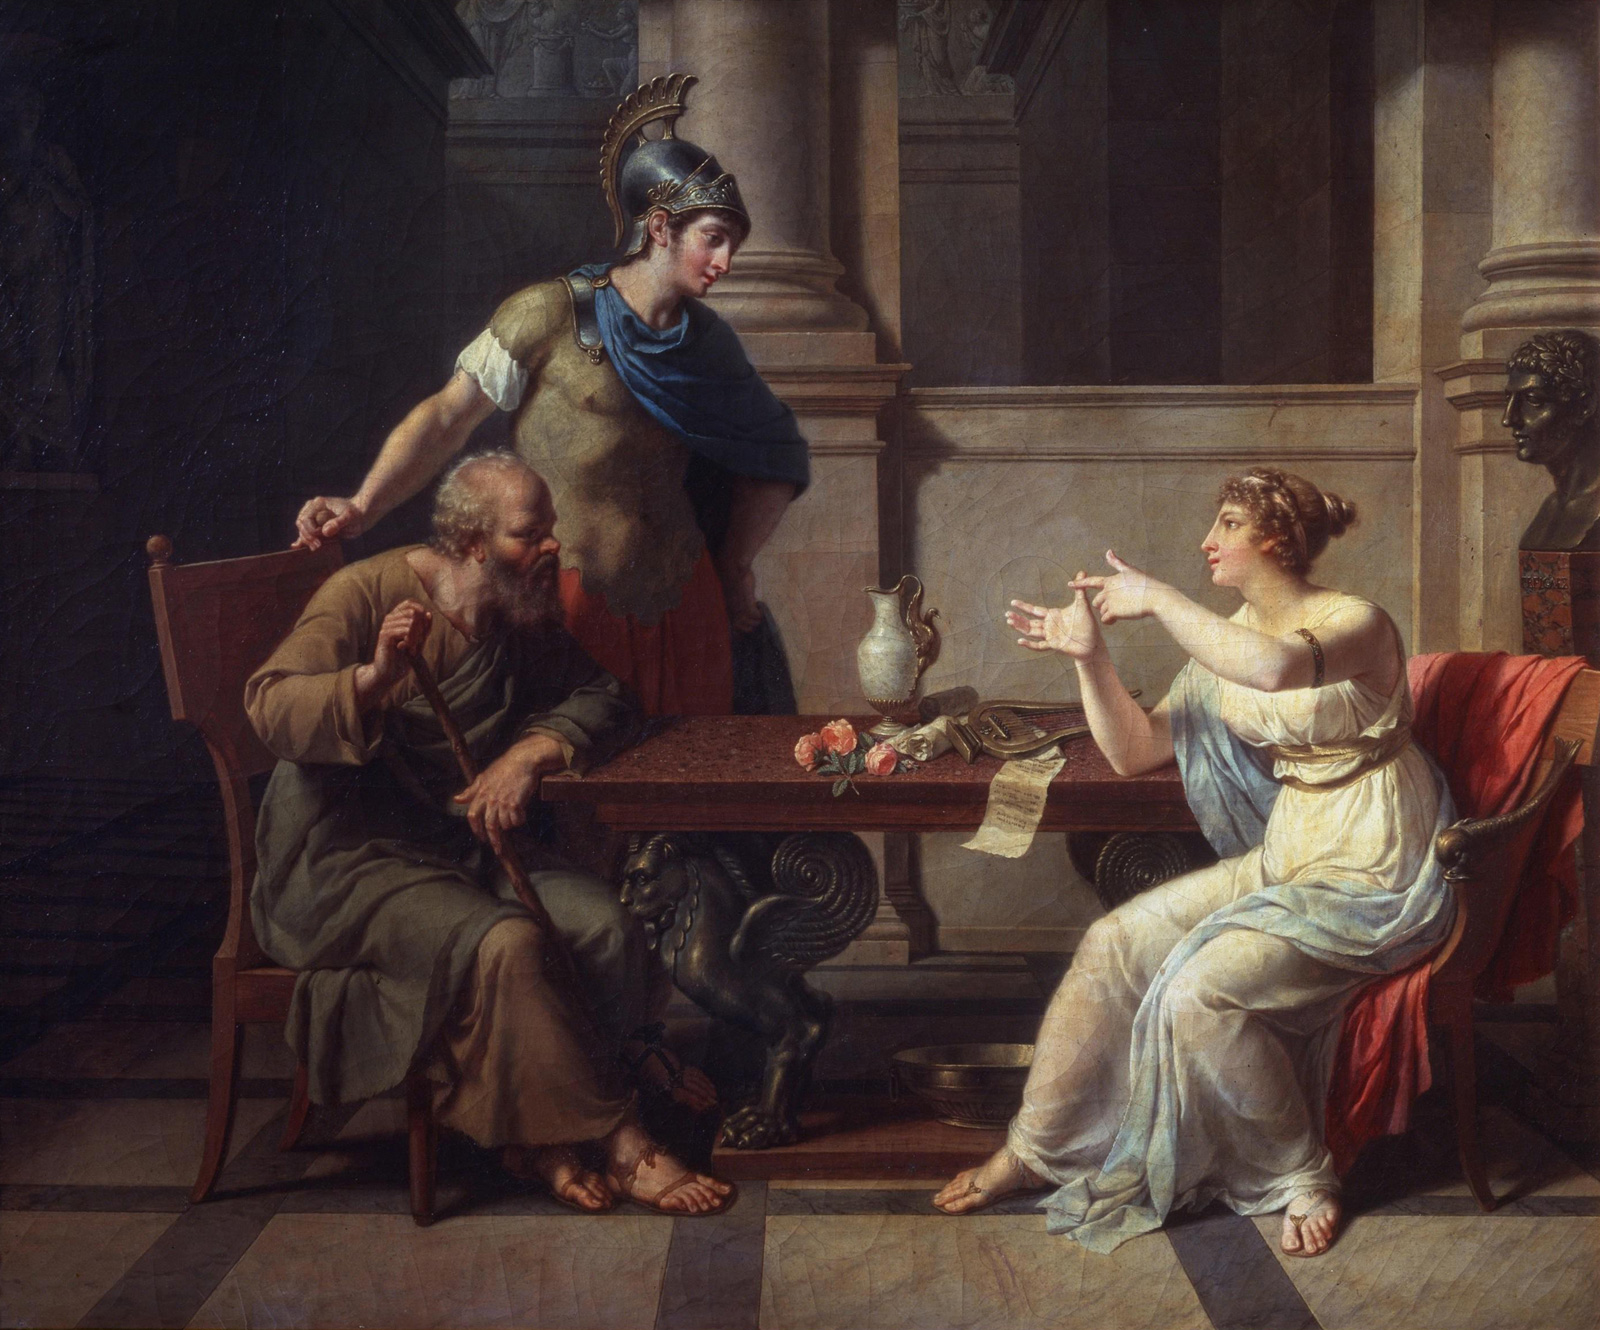 An eighteen oh one painting by Nicolas Monsiaux titled “The Debate of Socrates and Aspasia,” which depicts a conversation between the philosopher and the orator, with Alcibiades standing next to Socrates.